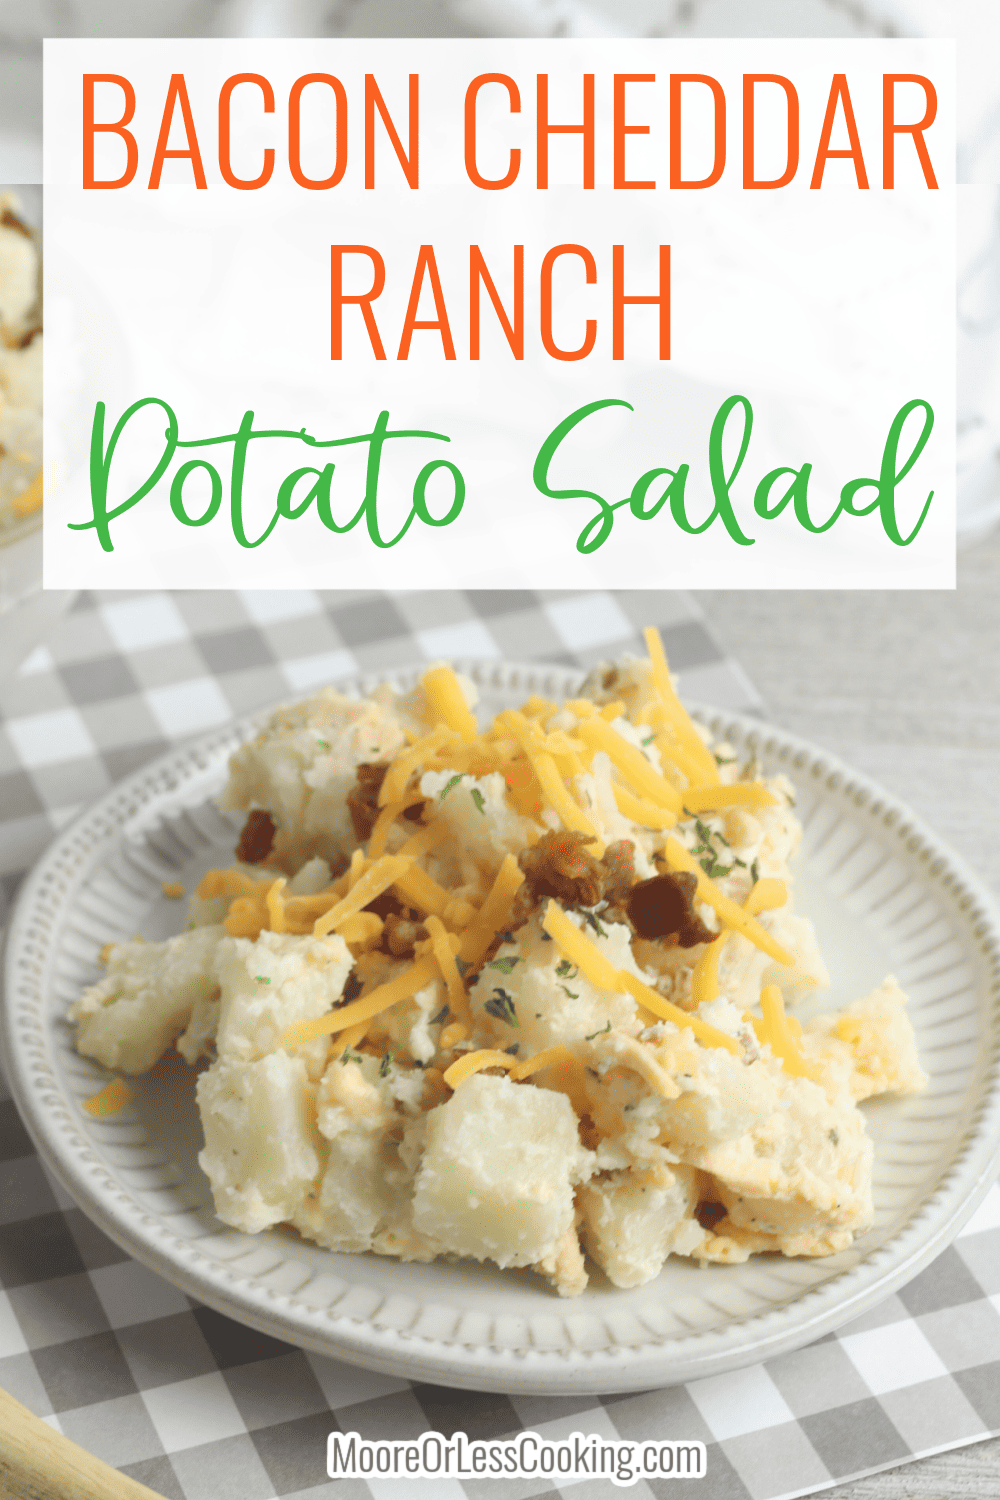 This potato salad recipe is loaded with all the ingredients that make it a crowd-pleaser - shredded cheddar cheese, crumbled salty bacon, a creamy dressing with a flavorful ranch twist, and tender potatoes. This recipe is also perfect for adding in even more delicious ingredients if you want to experiment with layering on other flavors. via @Mooreorlesscook